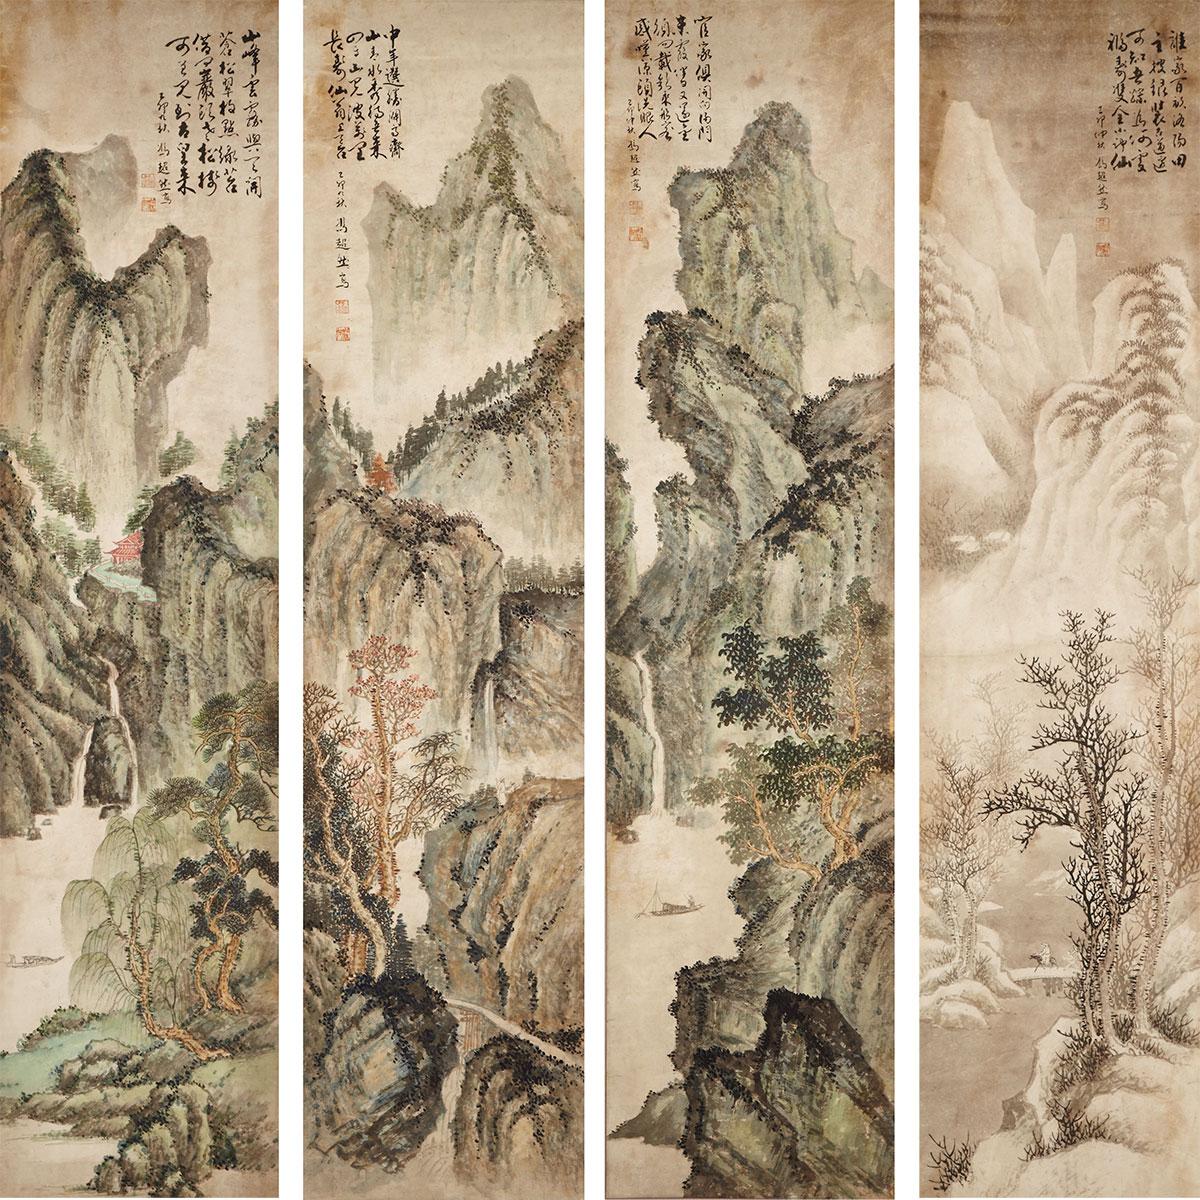 Attributed to Feng Chaoran (1882-1954)